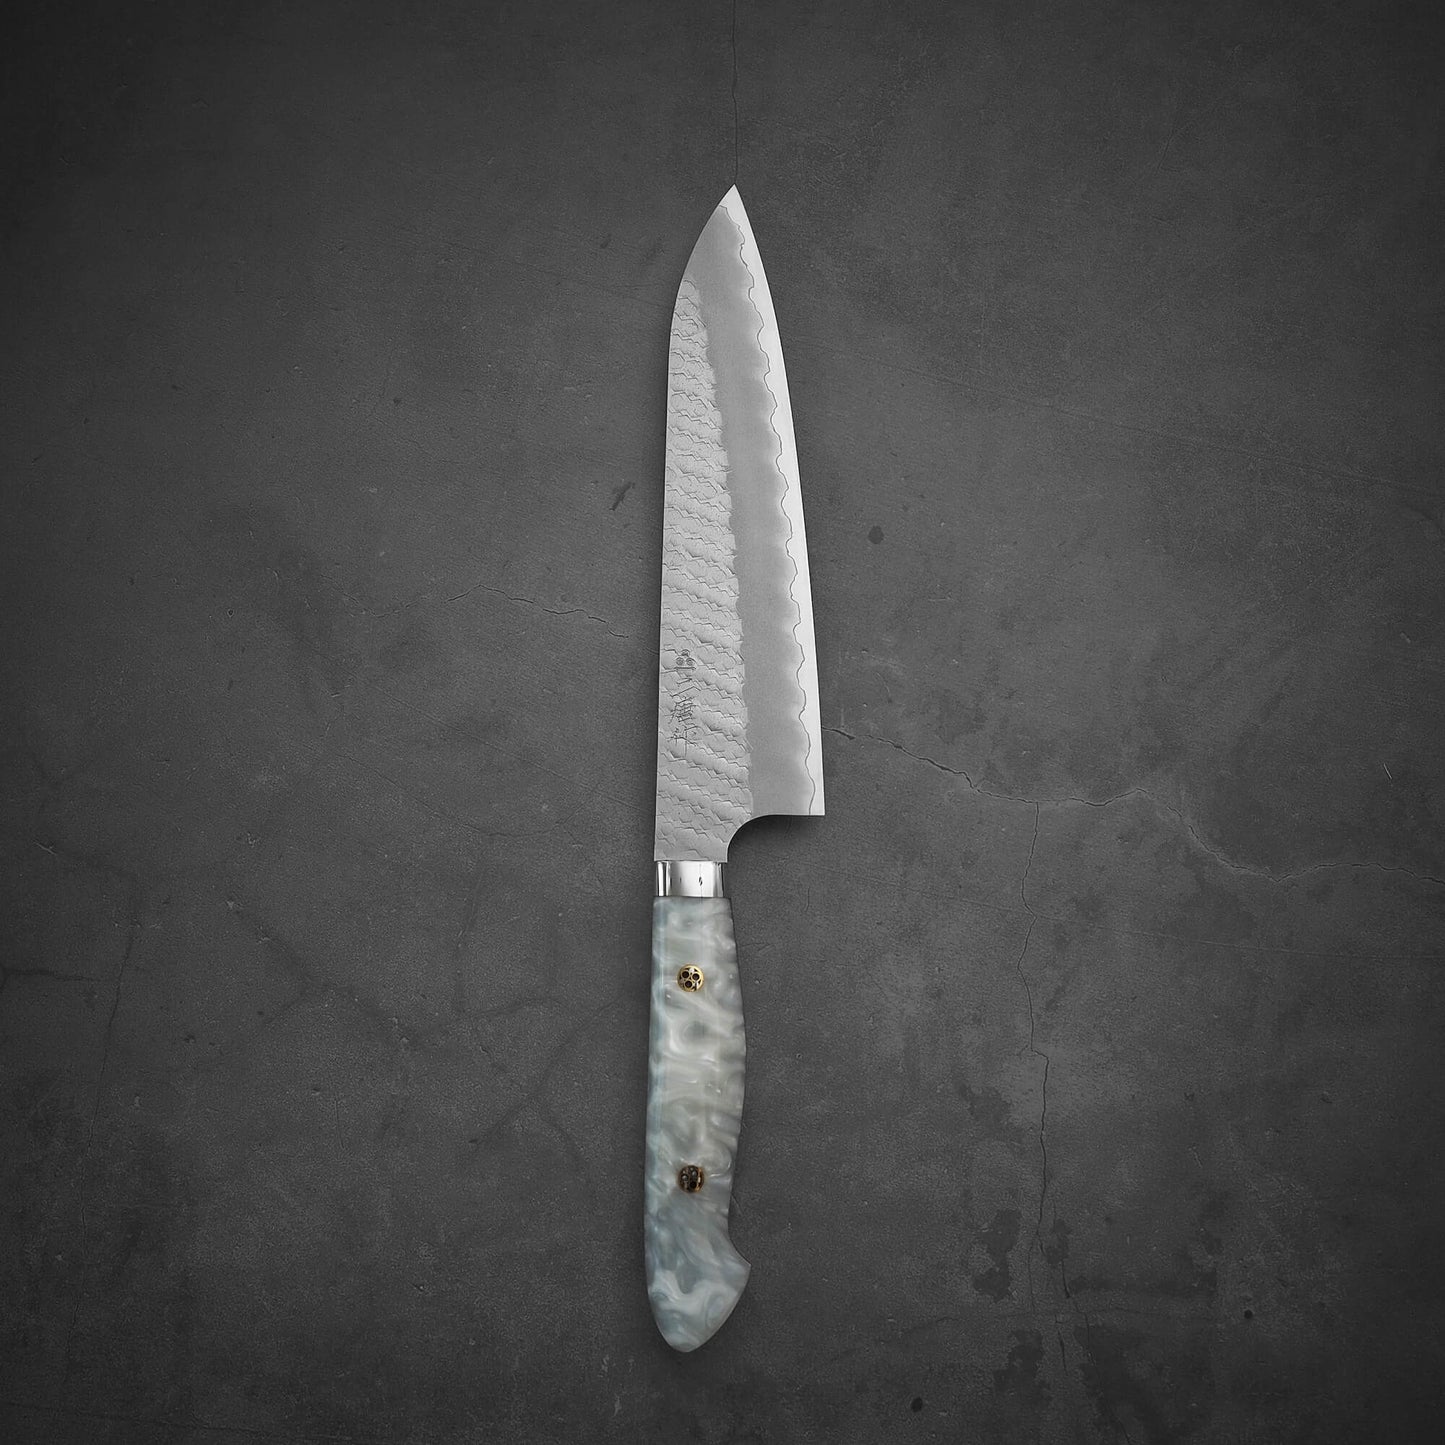 Top view of 210mm Nigara tsuchime SG2 gyuto knife with pearl handle resin in vertical position